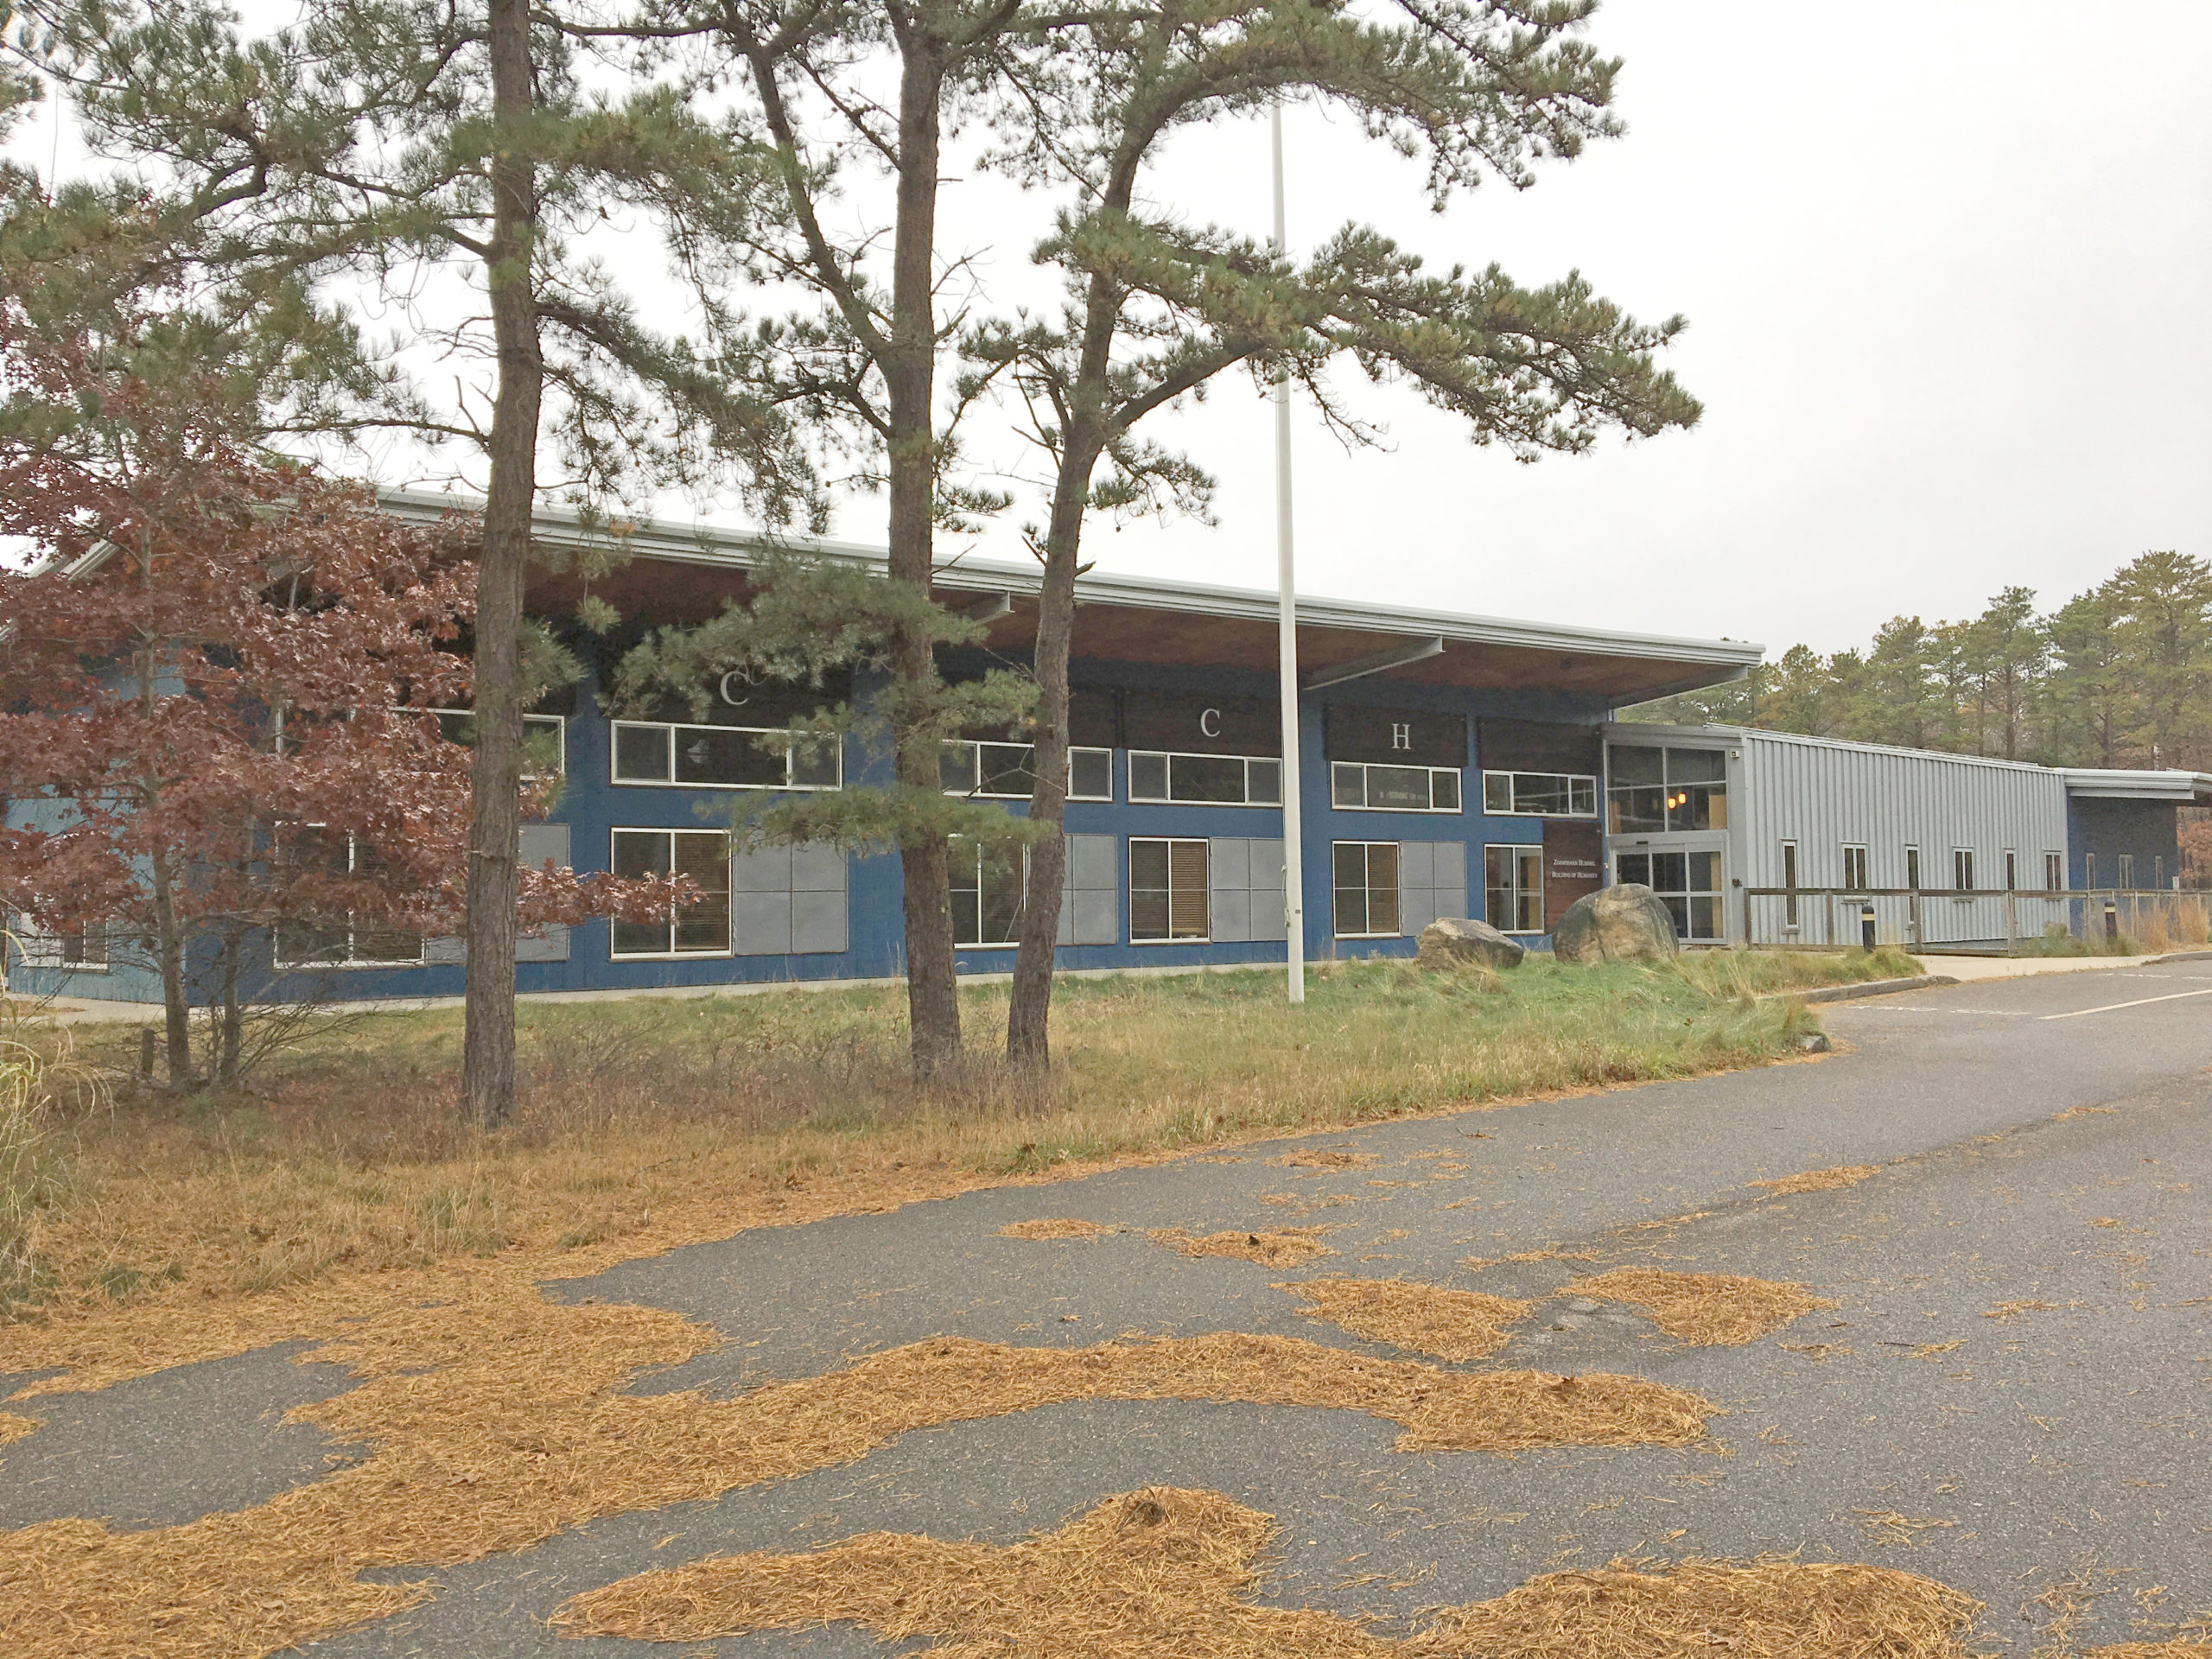 East Hampton Town is preparing the former CDCH building on Stephen Hands Path to be used as a vaccination center in hopes that having the logistics in place will attract a supply of vaccine shots from the state distribution program.